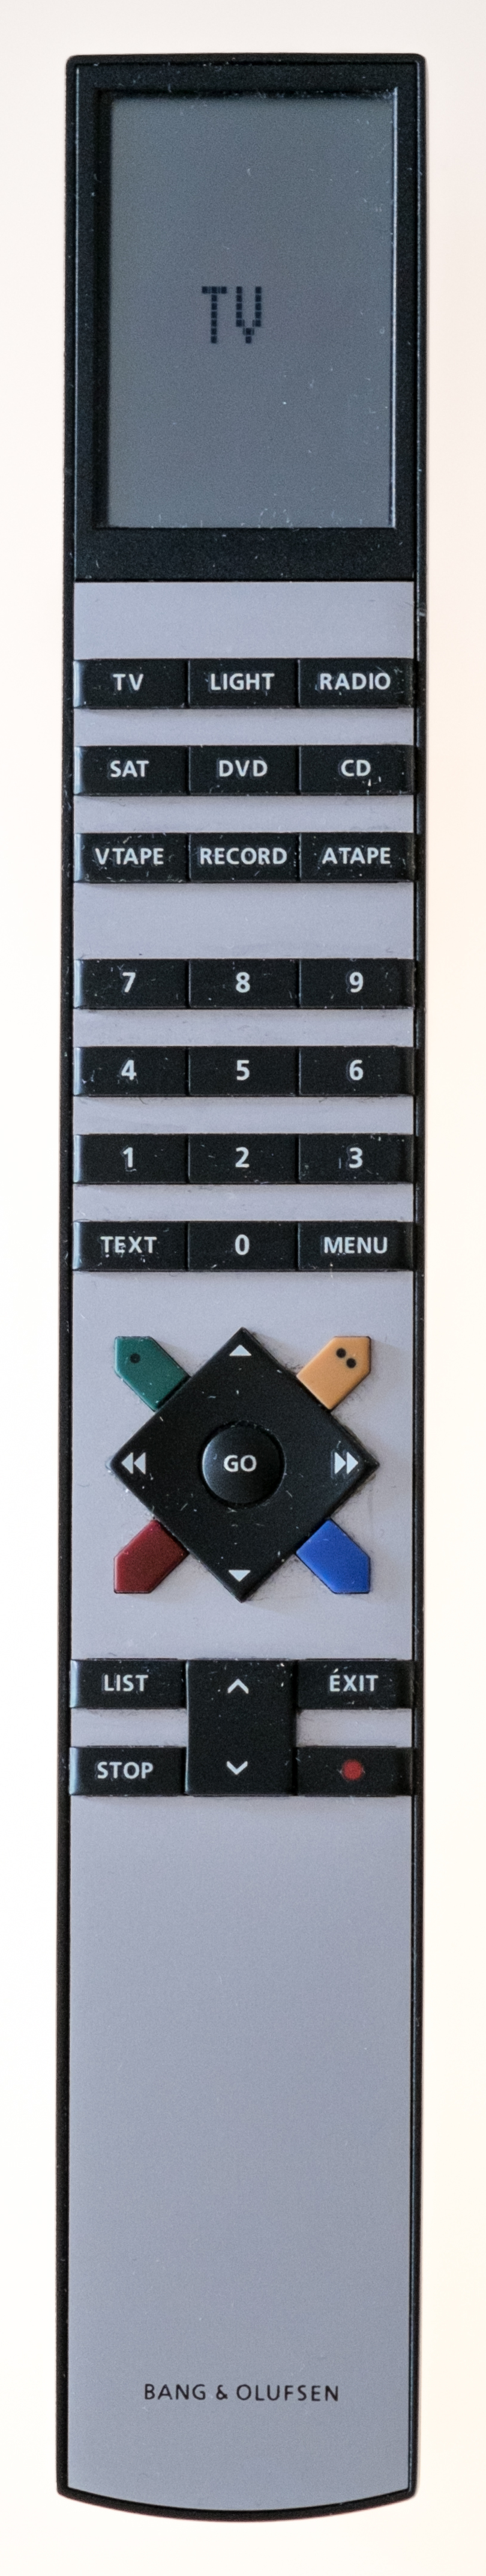 File:BEO4 Bang Olufsen remote control.jpg - Wikimedia Commons